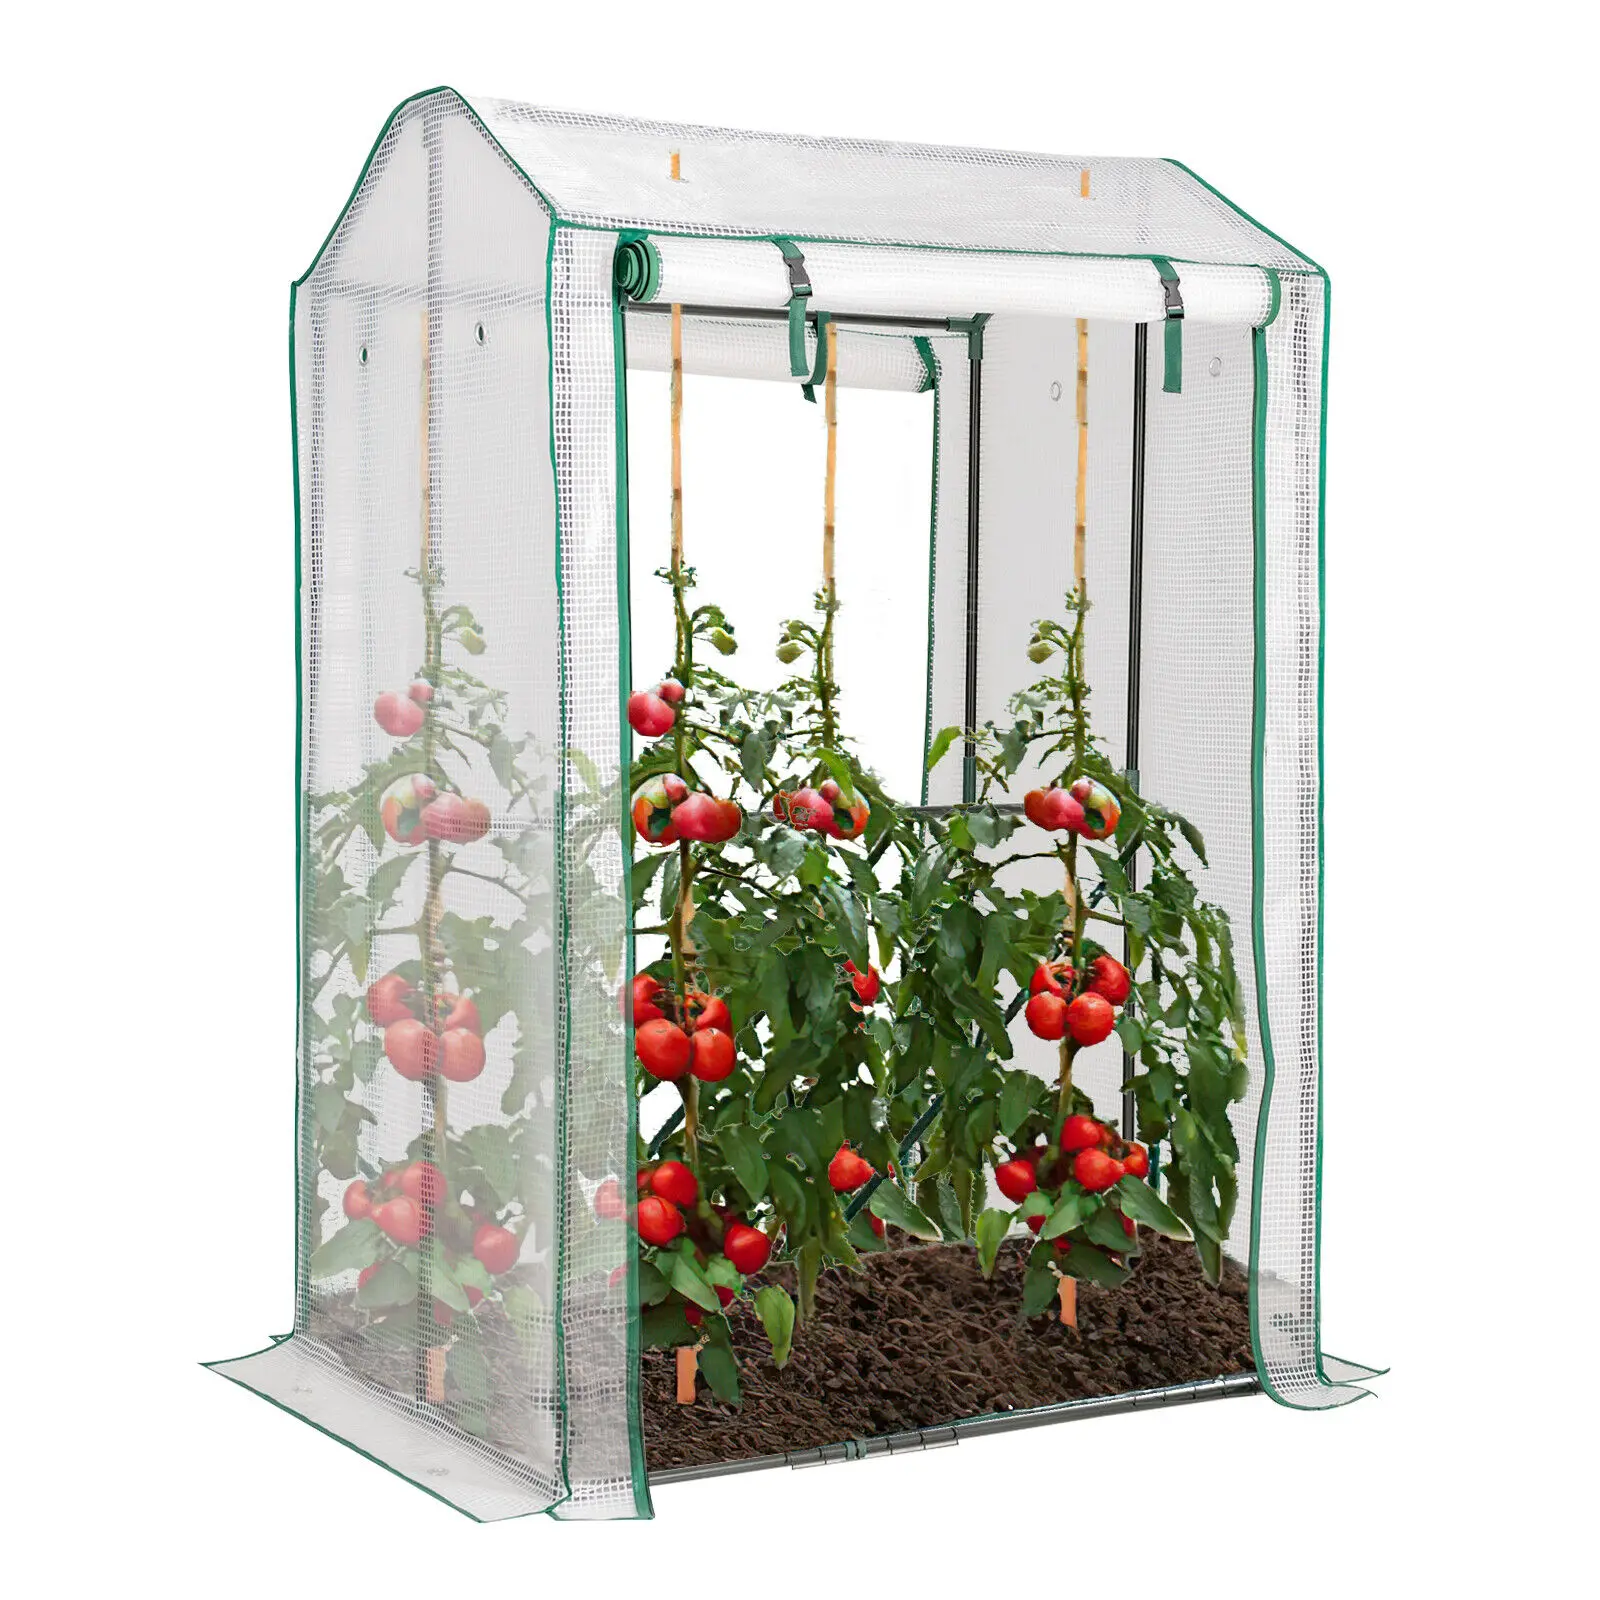 39" x 32" x 59" Walk-in Garden Greenhouse Warm House for Plant Growing